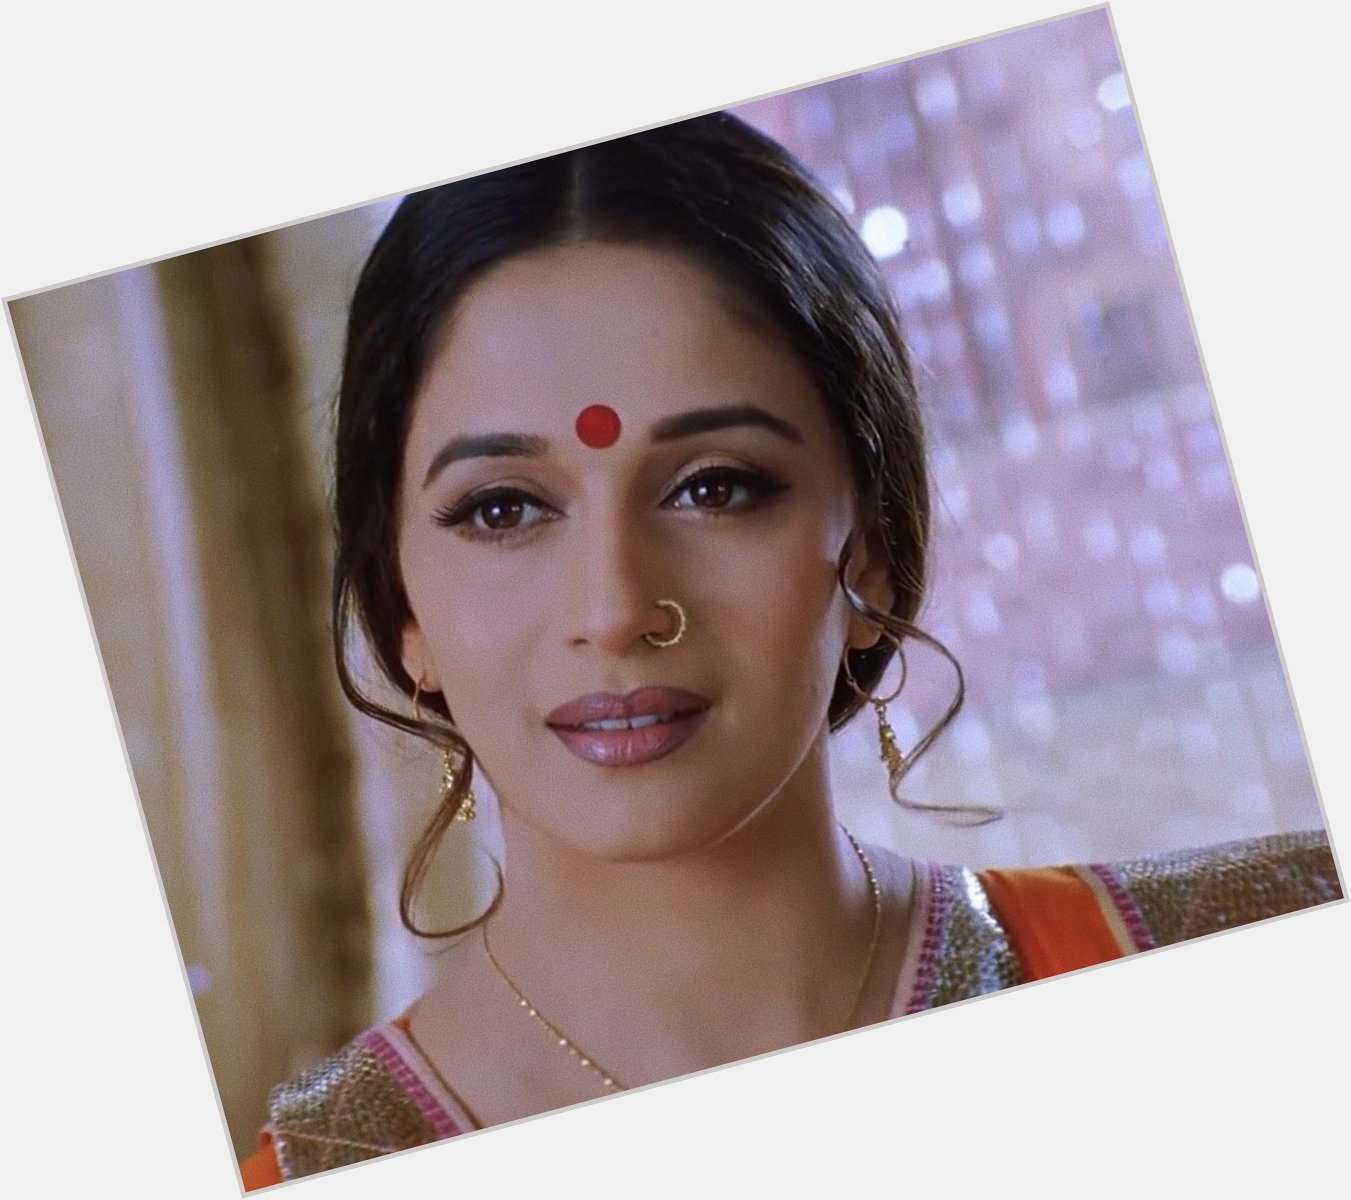 Happy birthday to madhuri dixit, one of the most beautiful and talented actors to grace the silver screen 